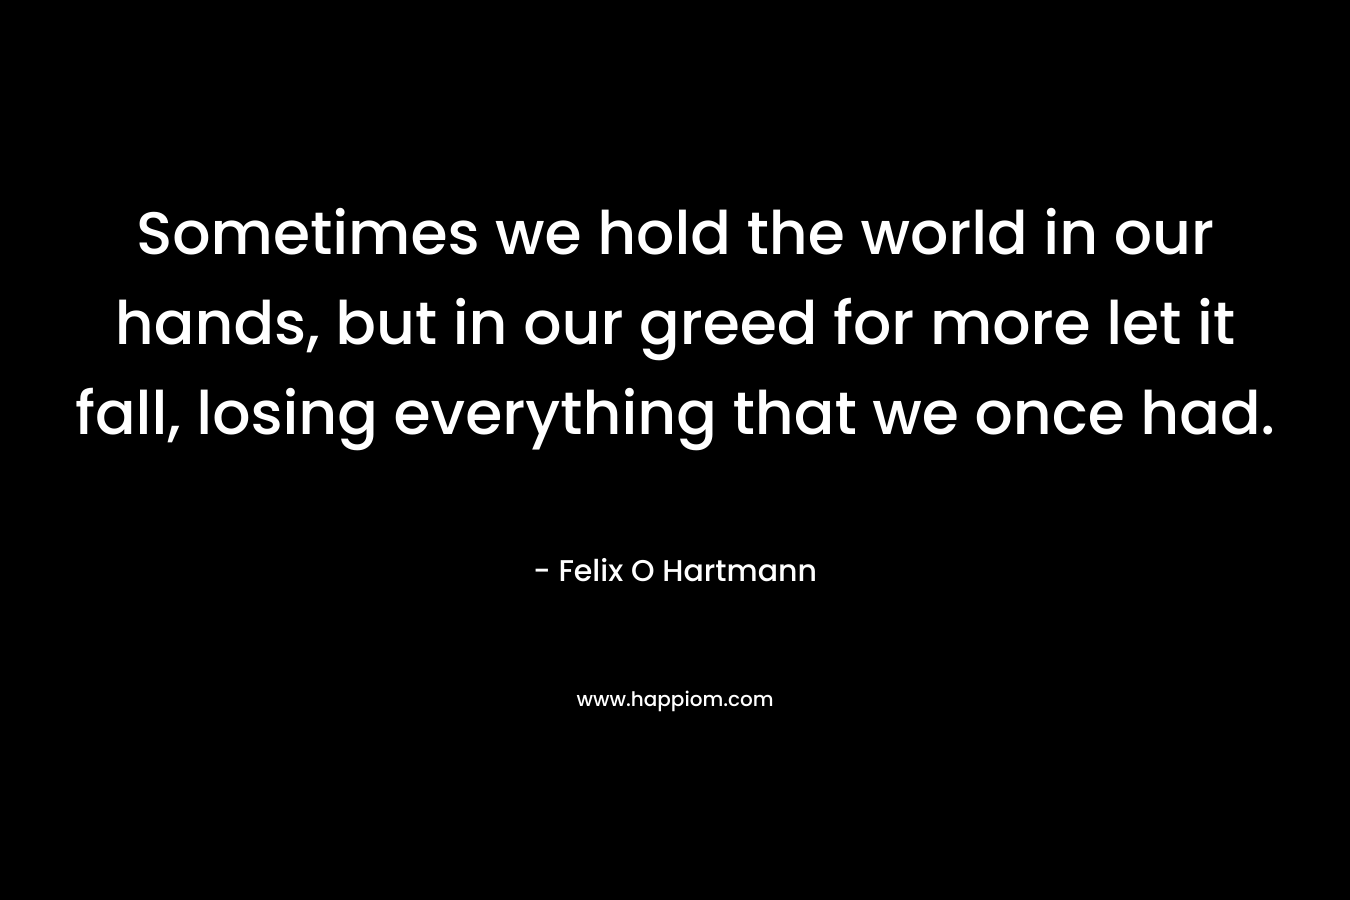 Sometimes we hold the world in our hands, but in our greed for more let it fall, losing everything that we once had. – Felix O Hartmann